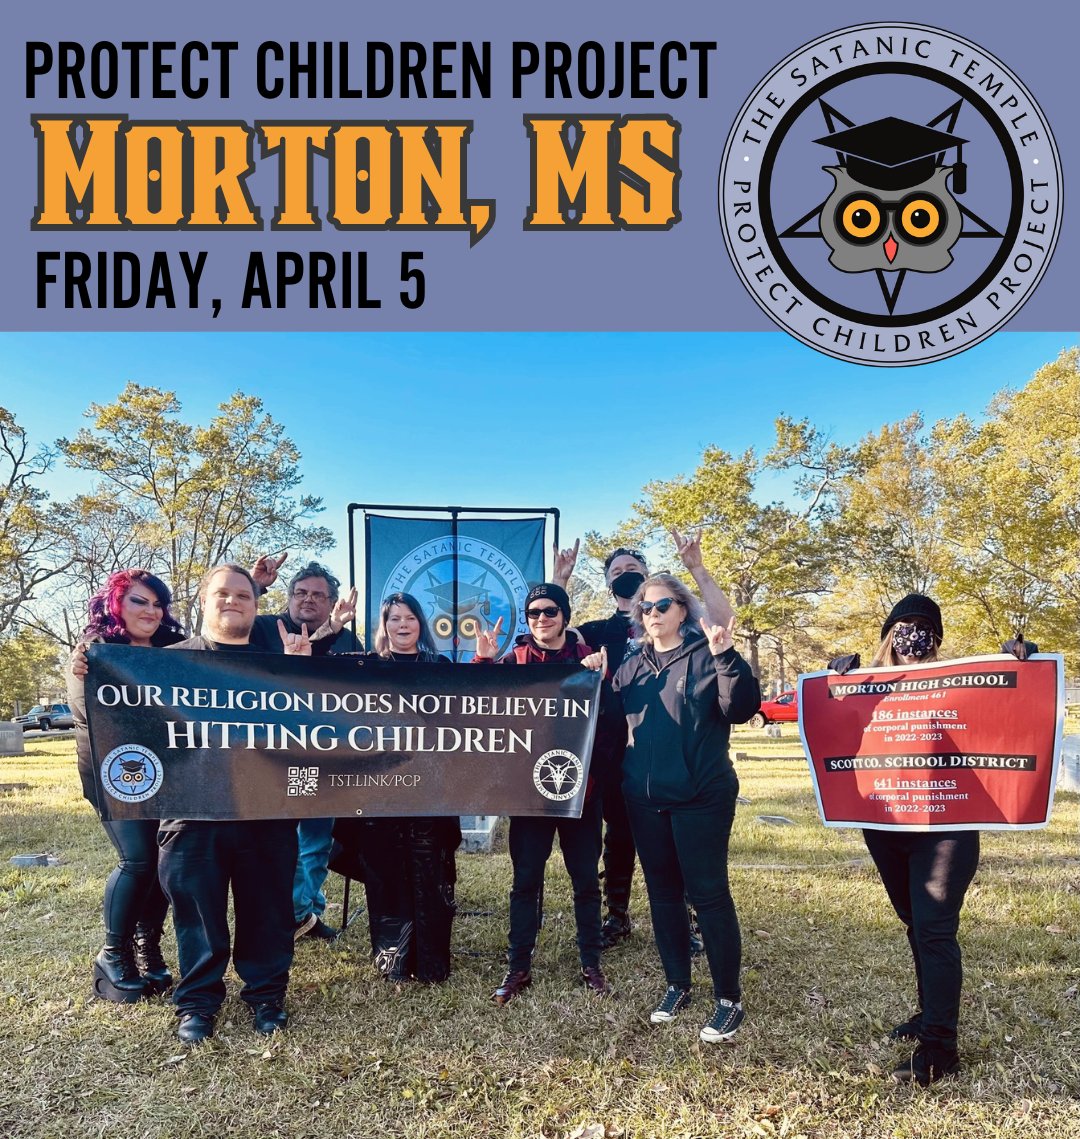 TST's Protect Children Project visited Morton, Mississippi, today, spotlighting 641 cases of corporal punishment in Scott Co. School District last year—MS's highest. Thanks to the volunteers who came out to support TST's student members! Learn about PCP: tst.link/pcp